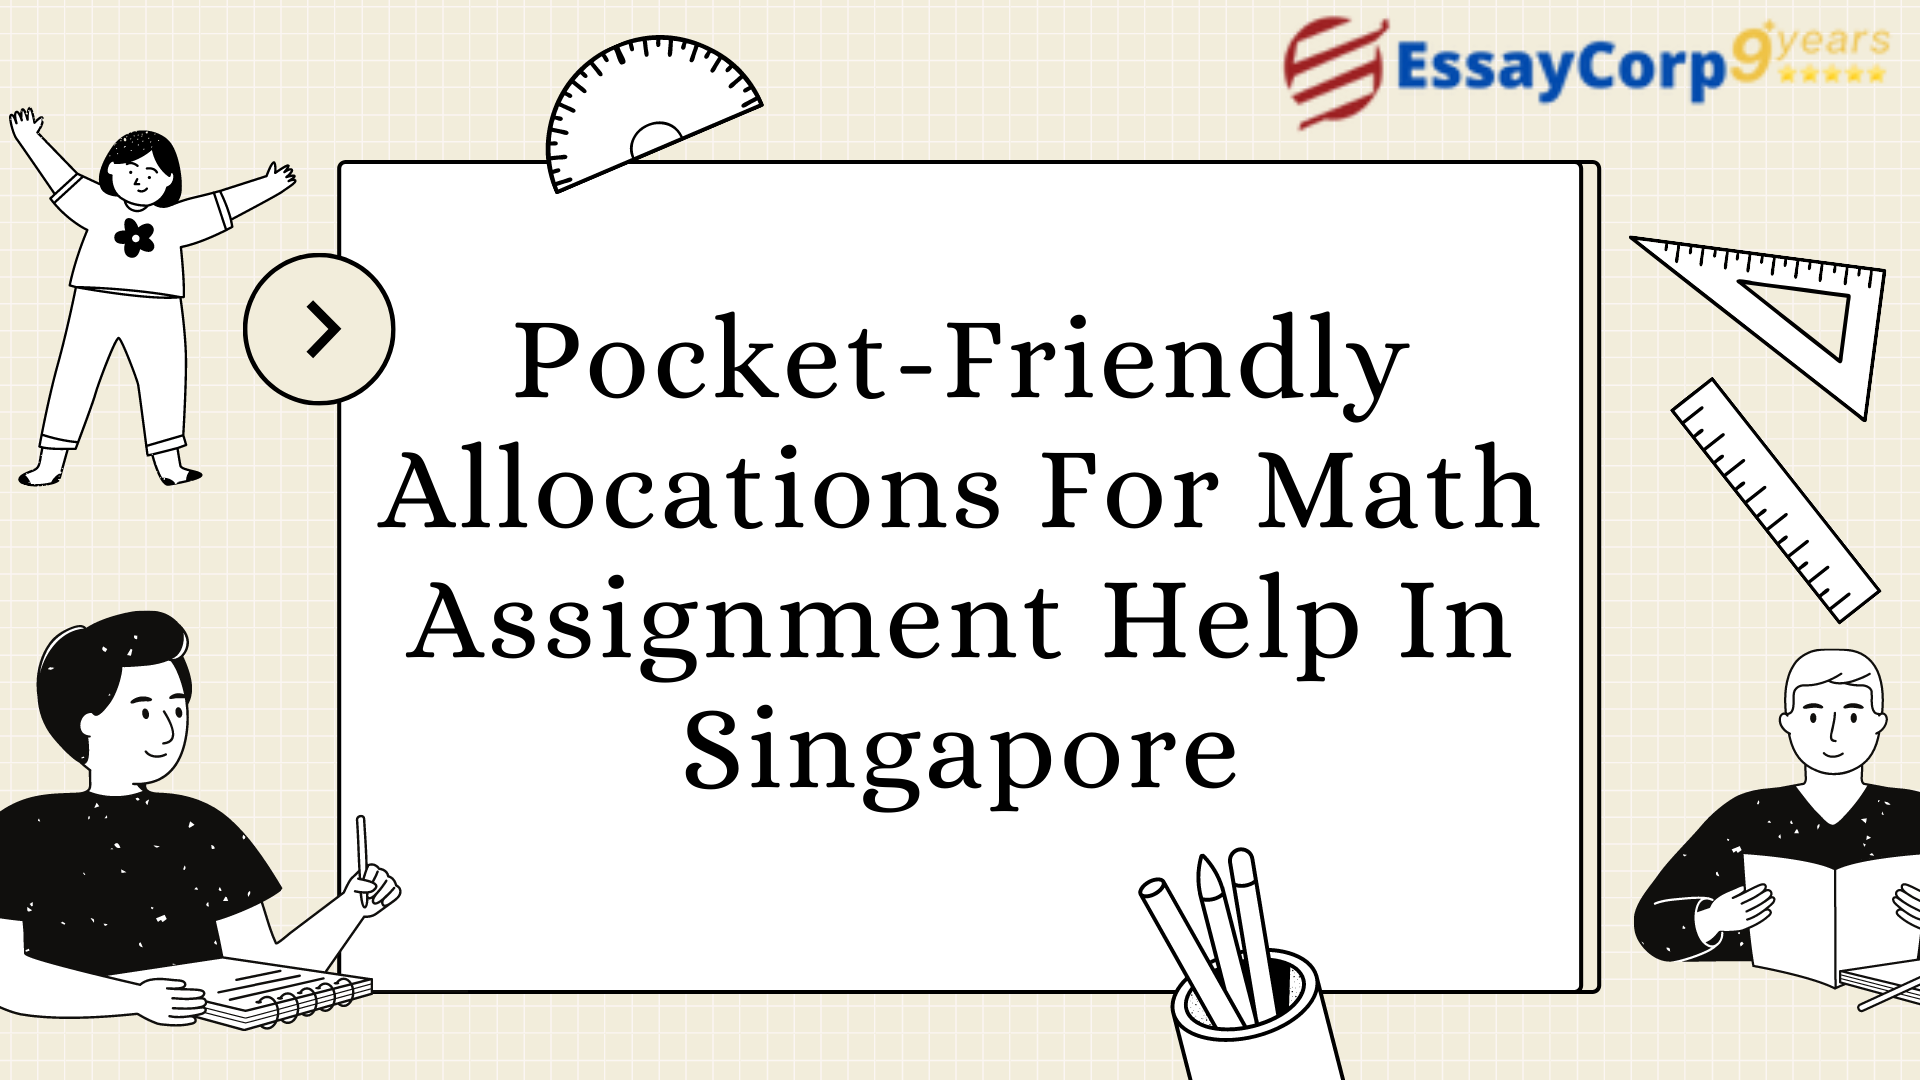 Pocket-Friendly Allocations For Math Assignment Help In Singapore